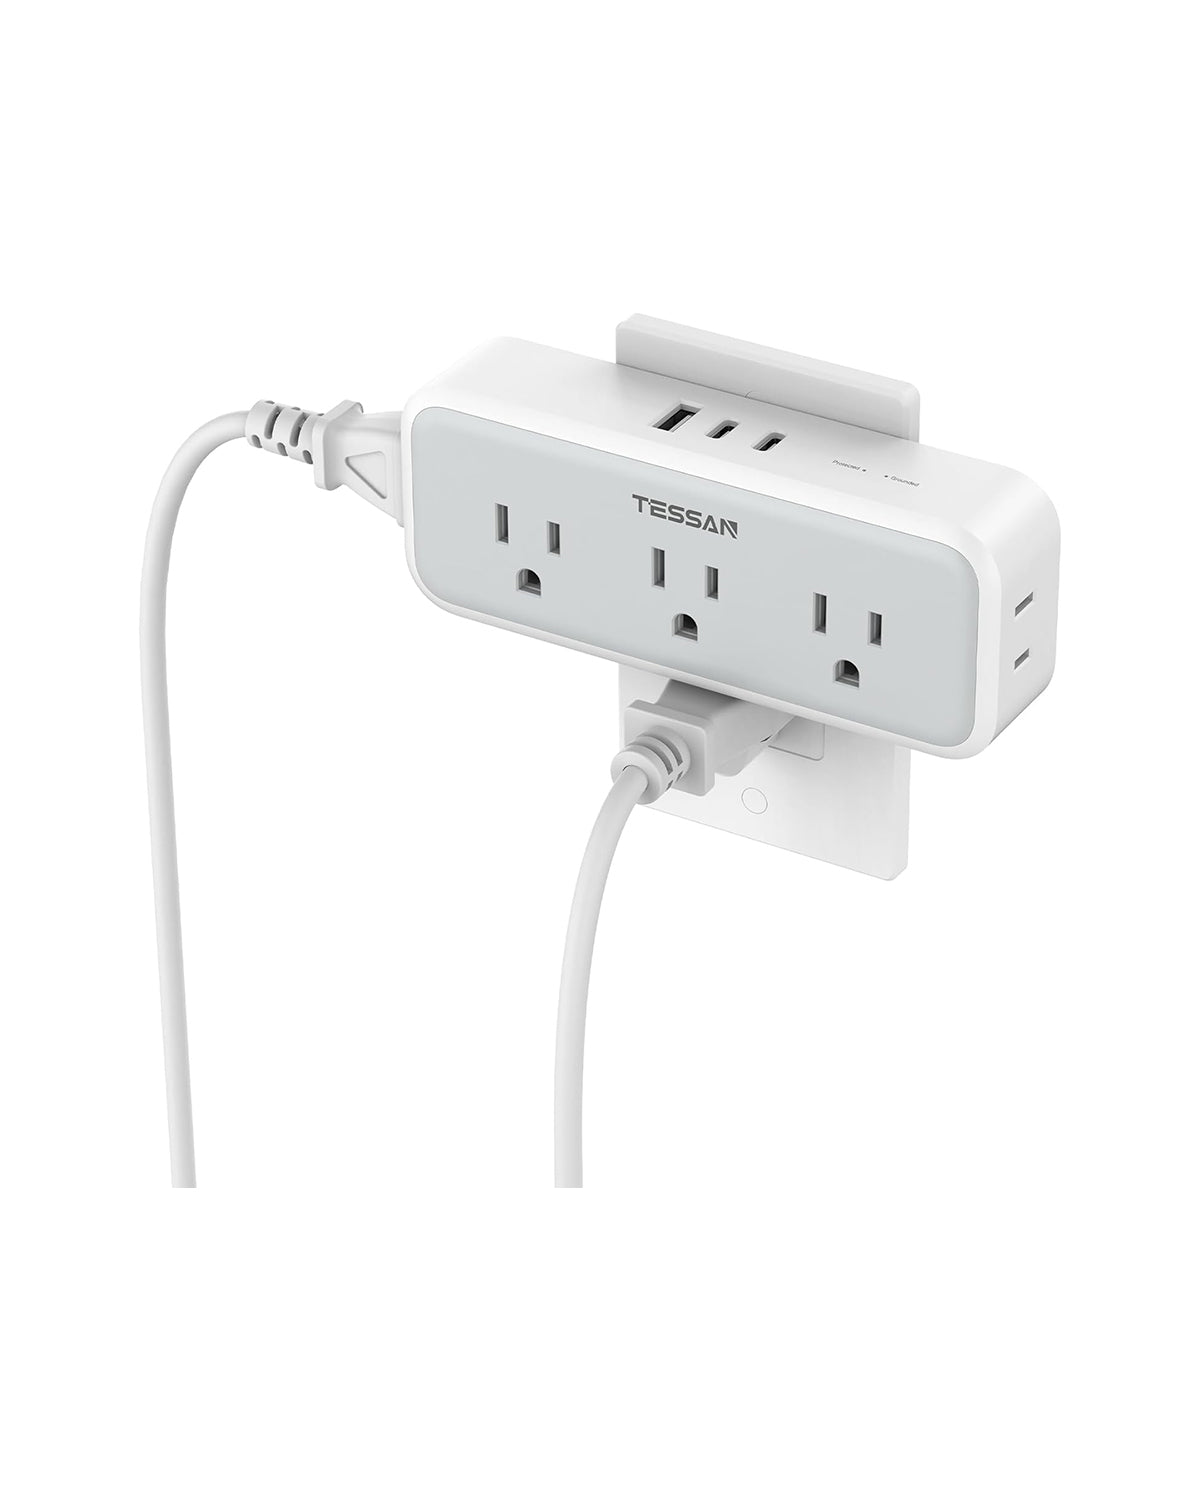 TESSAN Multiple Outlet Splitter with 5 Outlets and 3 USB (2 USB C), Multi Plug Outlet Extender, USB Wall Charger